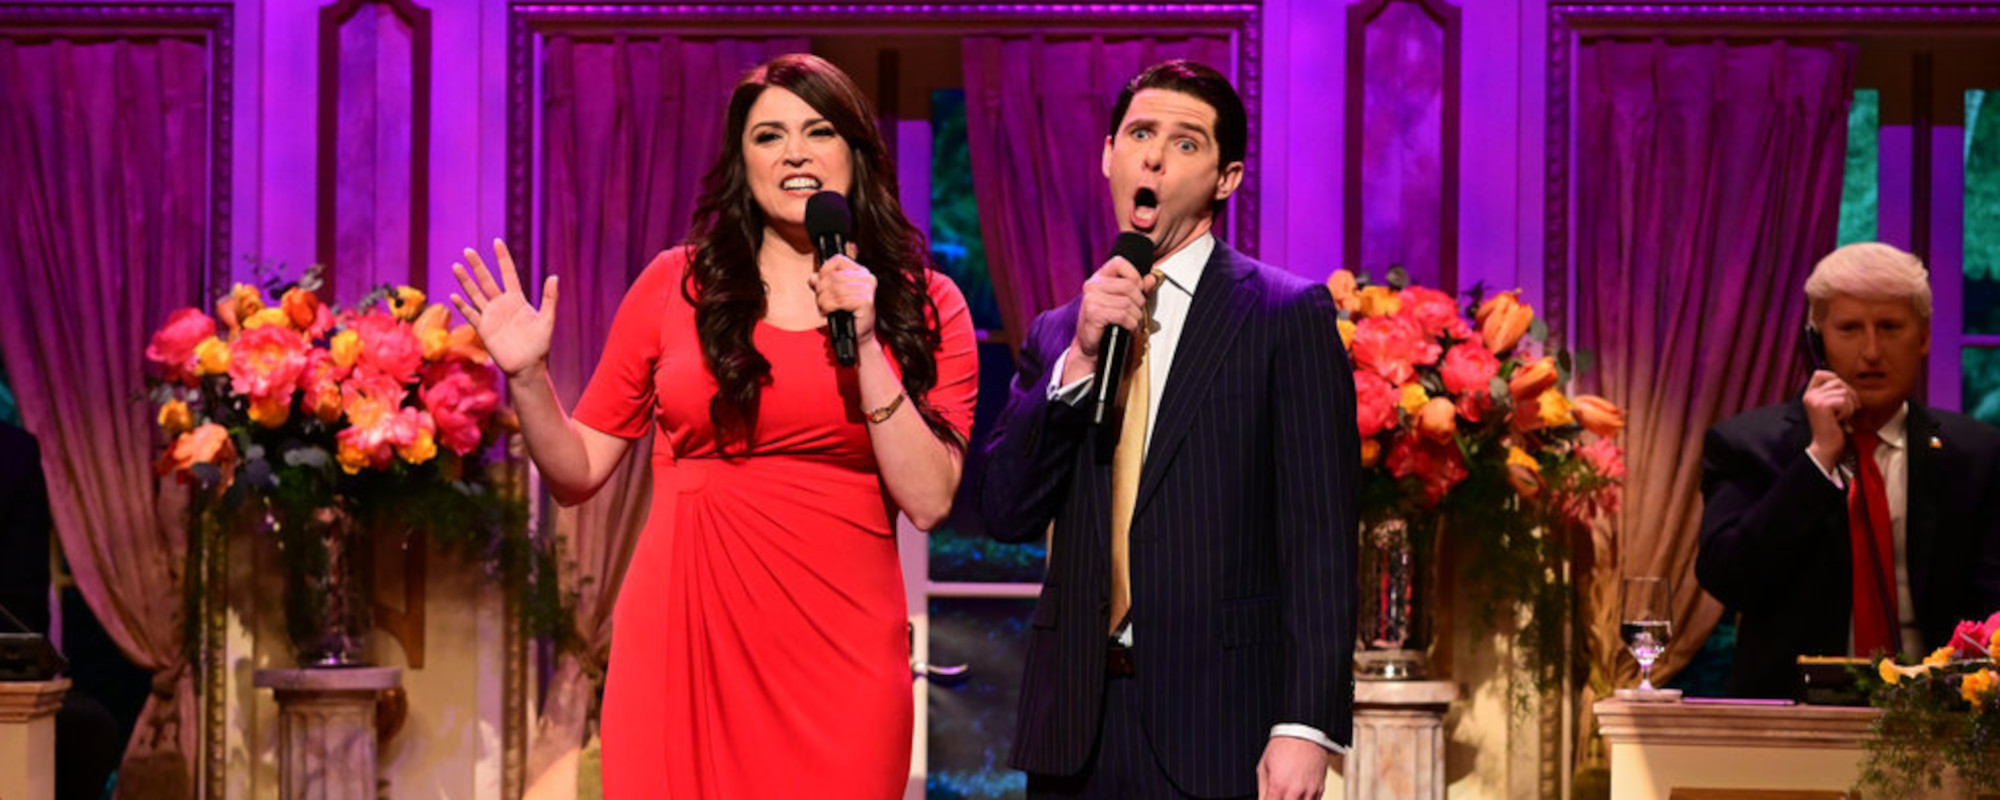 ‘Saturday Night Live’ Cold Open: Cecily Strong Sings “Shallow” in Russia-Fueled Parody